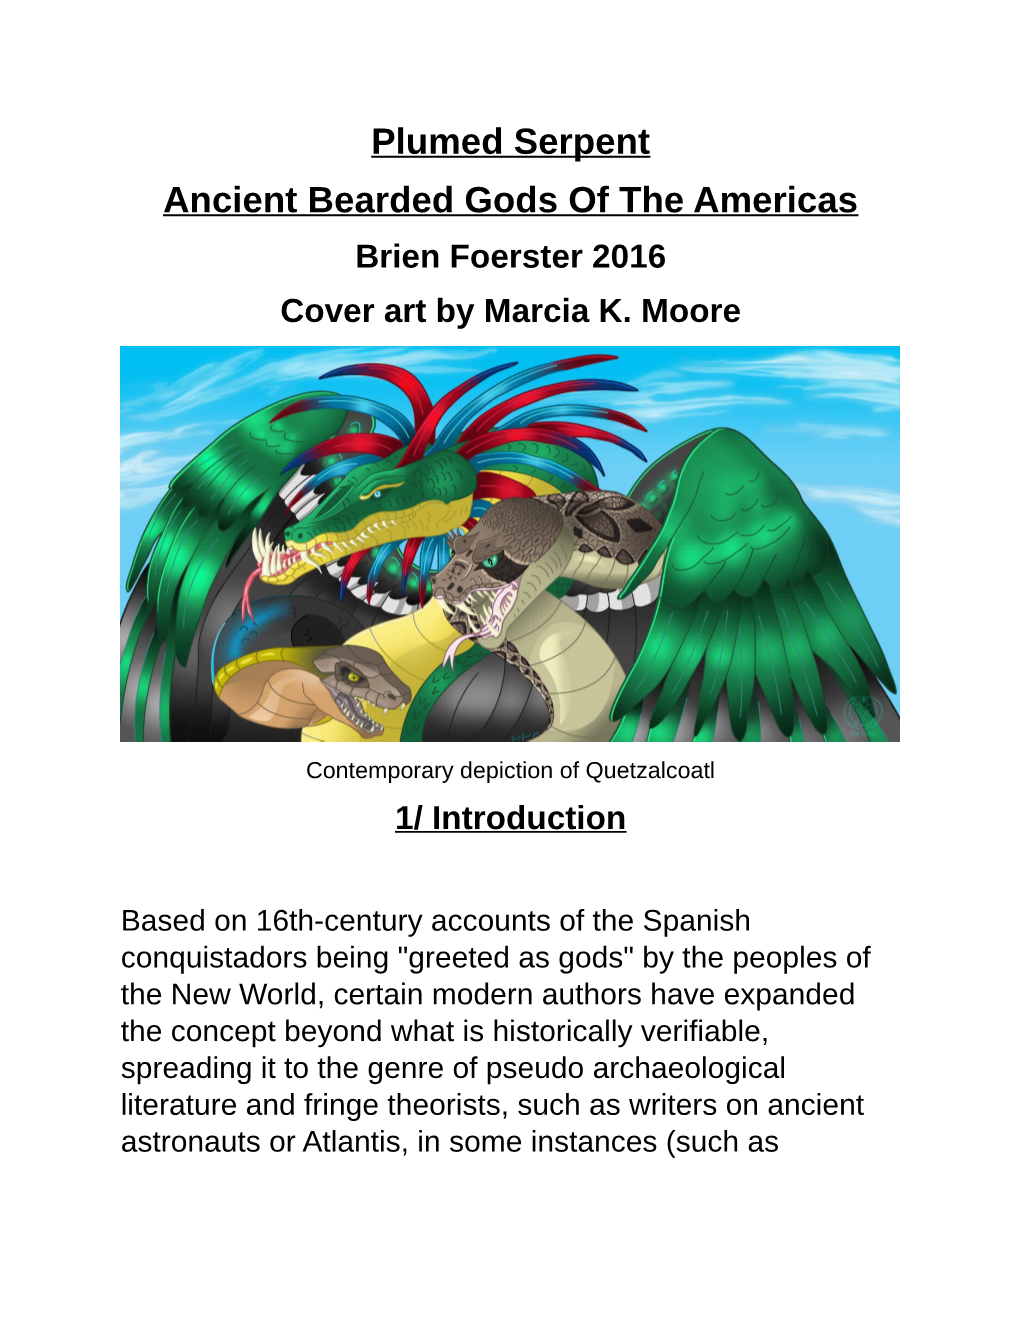 Plumed Serpent Ancient Bearded Gods of the Americas Brien Foerster 2016 Cover Art by Marcia K